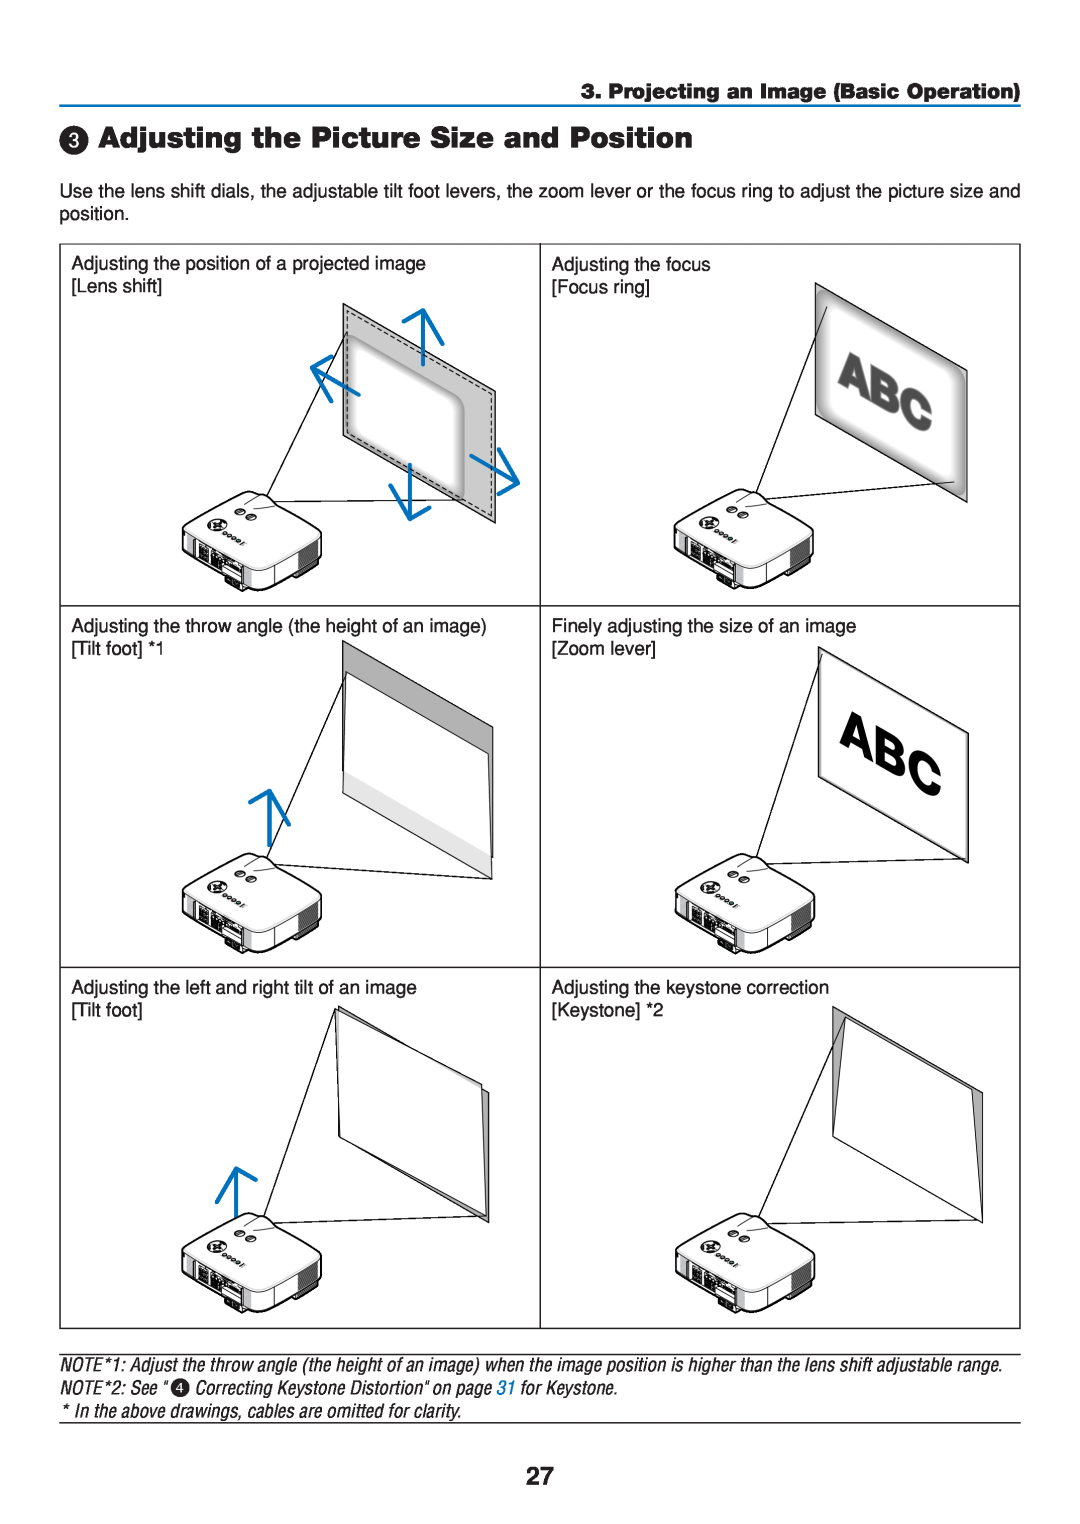 Dukane 8808 user manual Adjusting the Picture Size and Position, Projecting an Image Basic Operation 